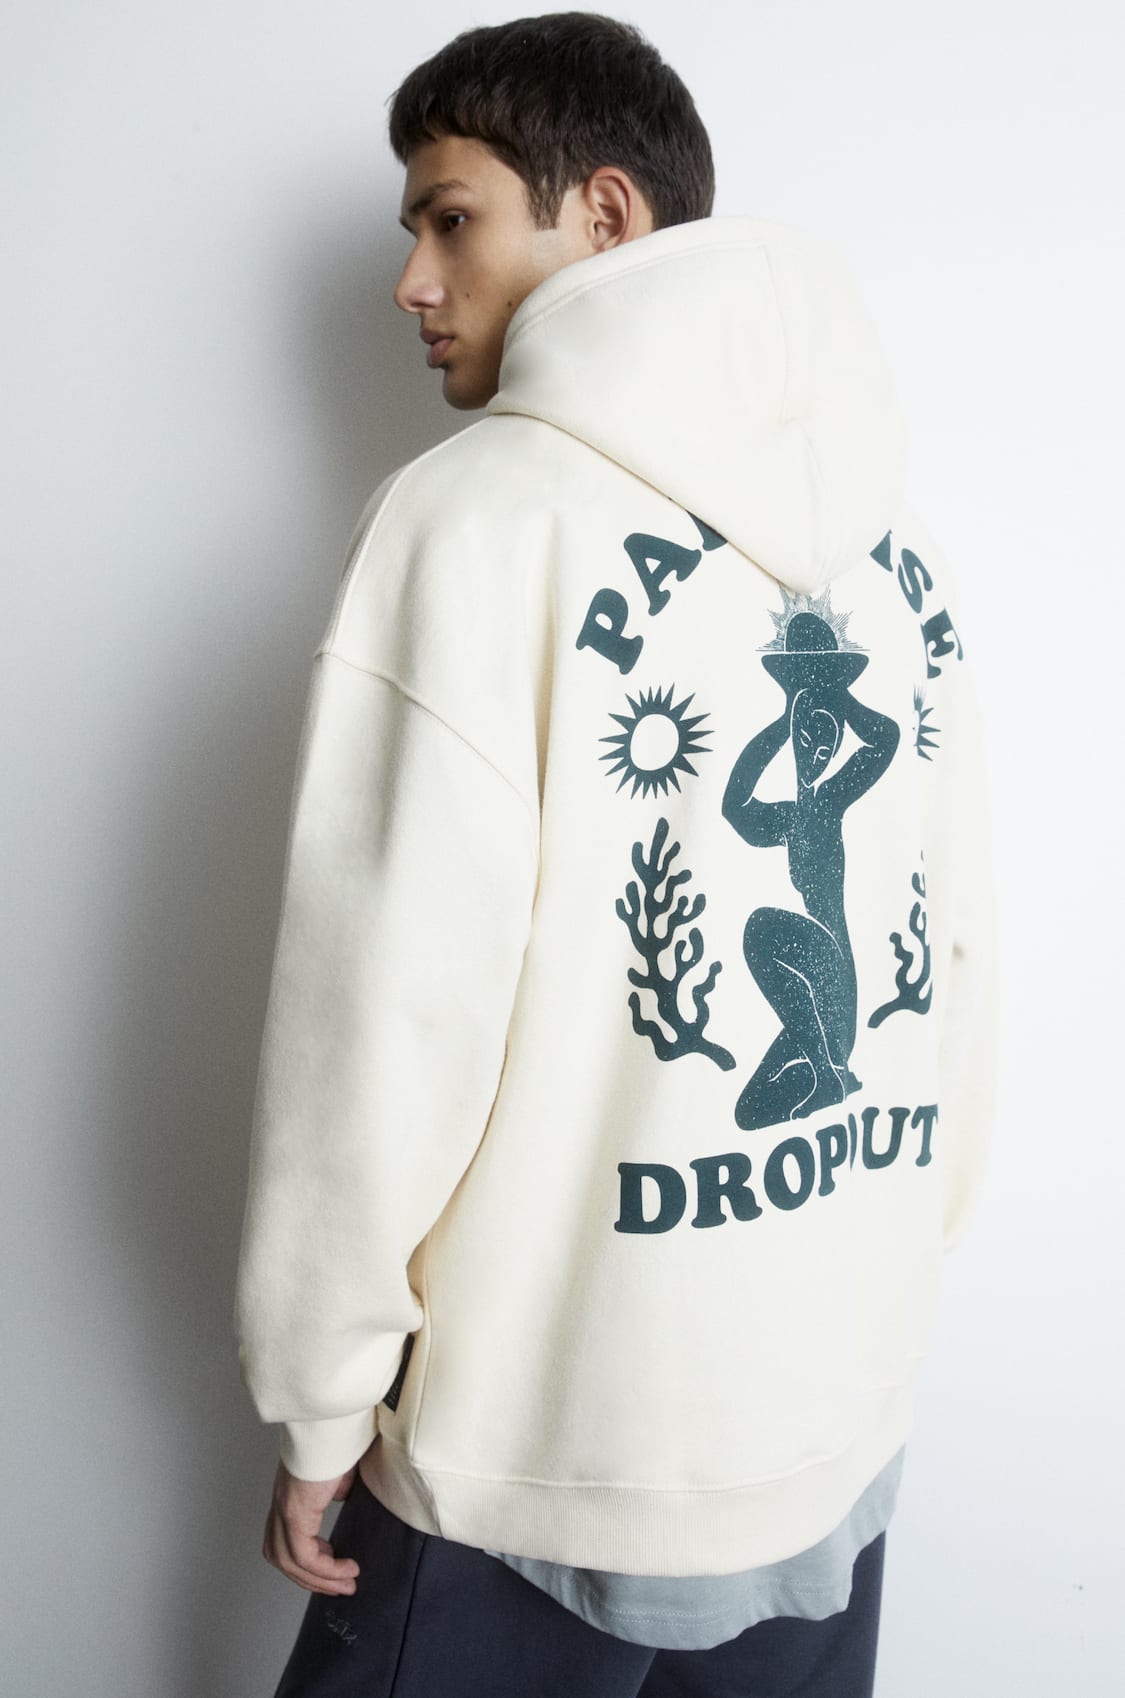 Paradise Dropout hoodie - pull&bear